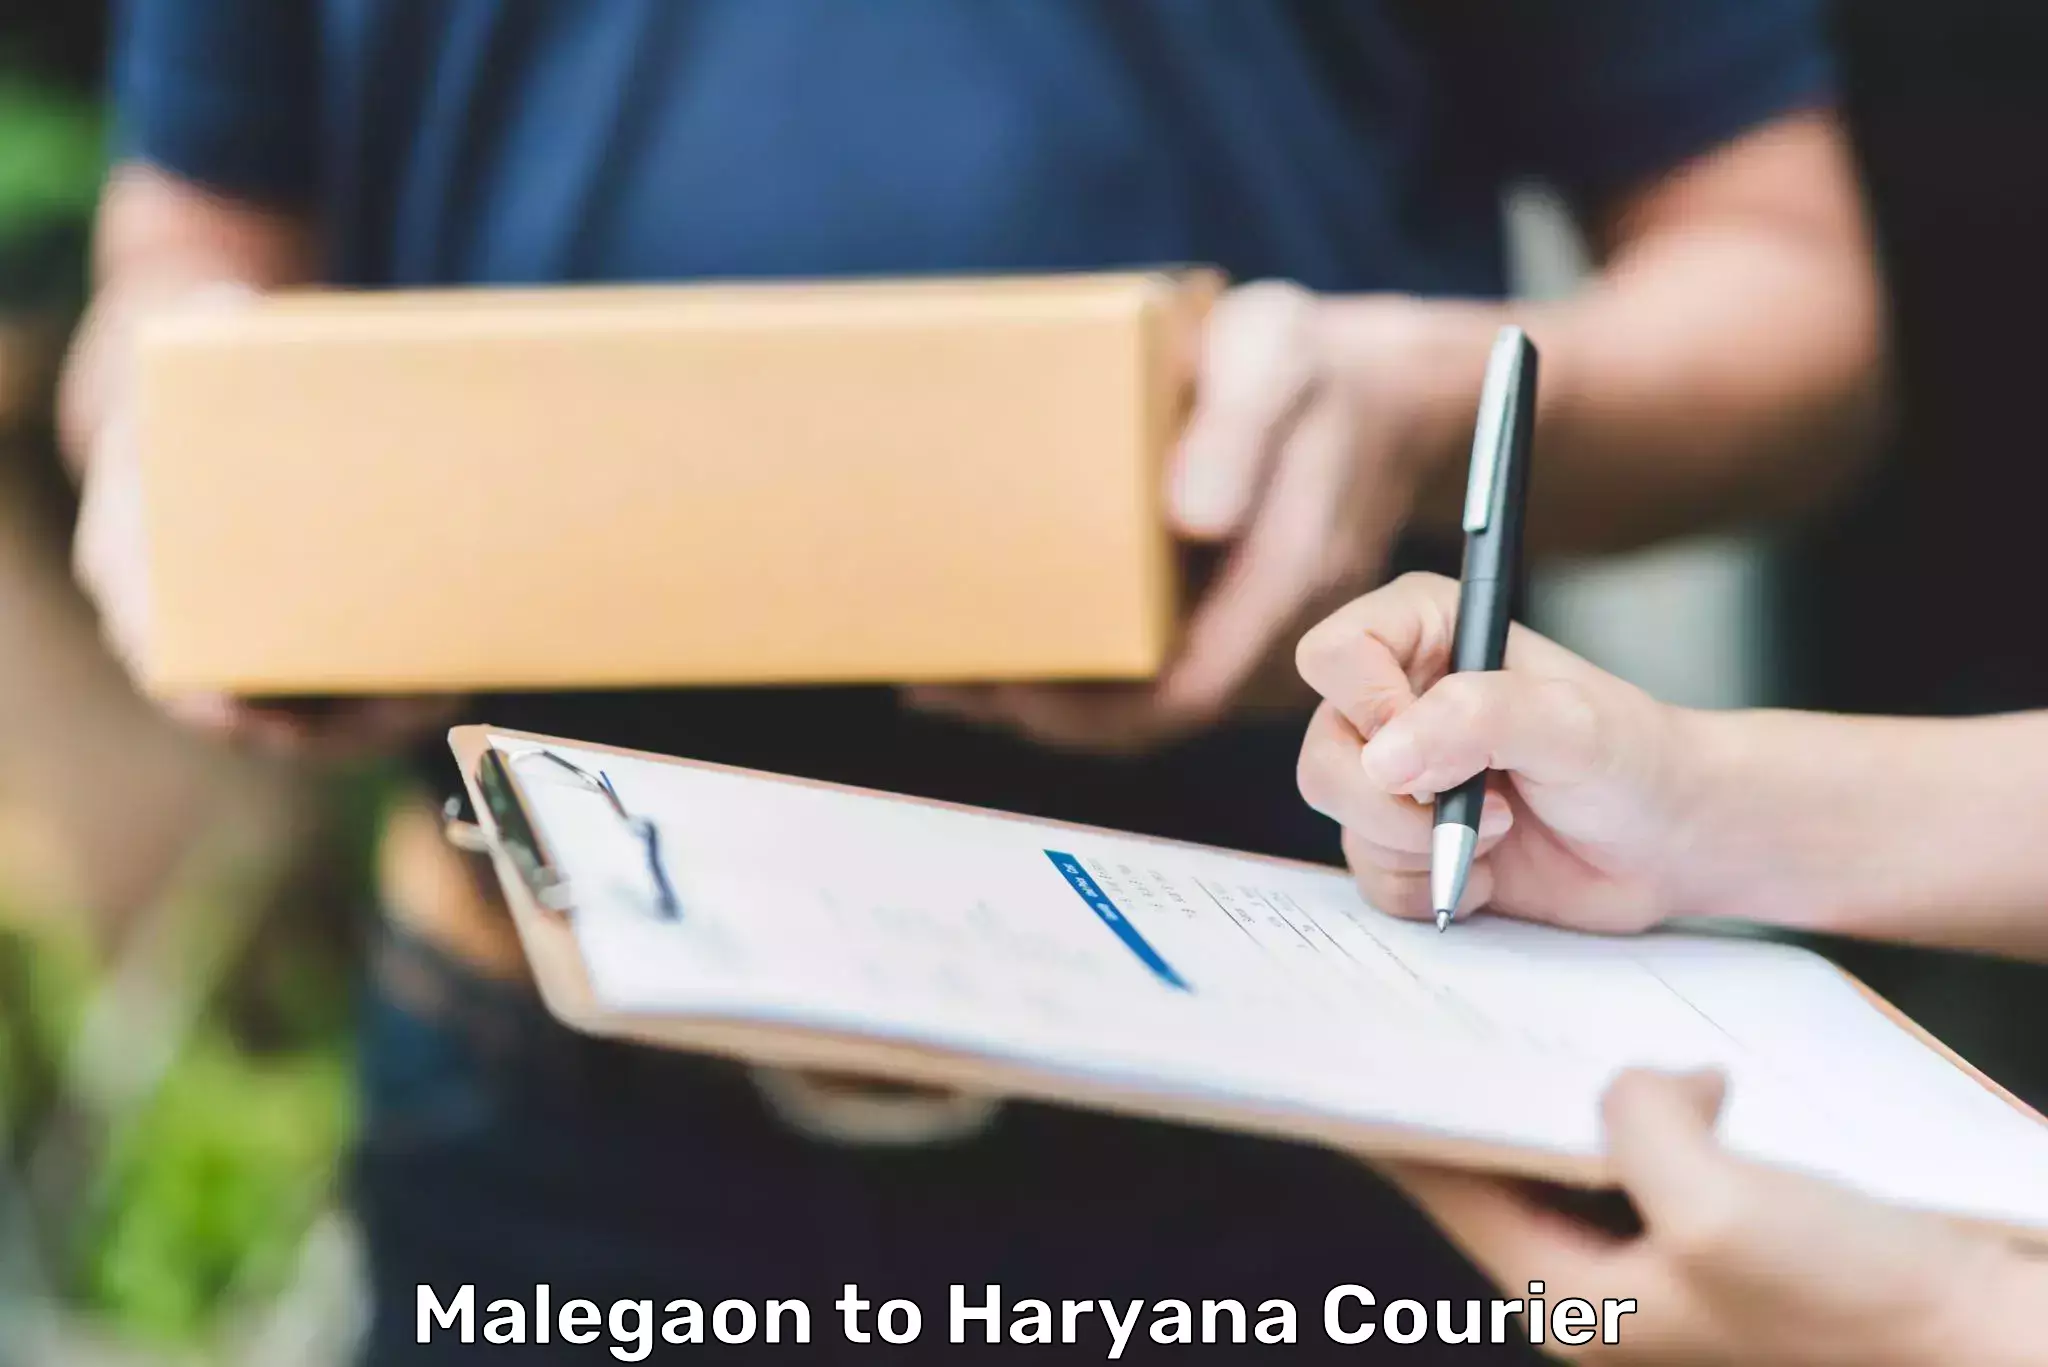 Urgent courier needs Malegaon to Rohtak